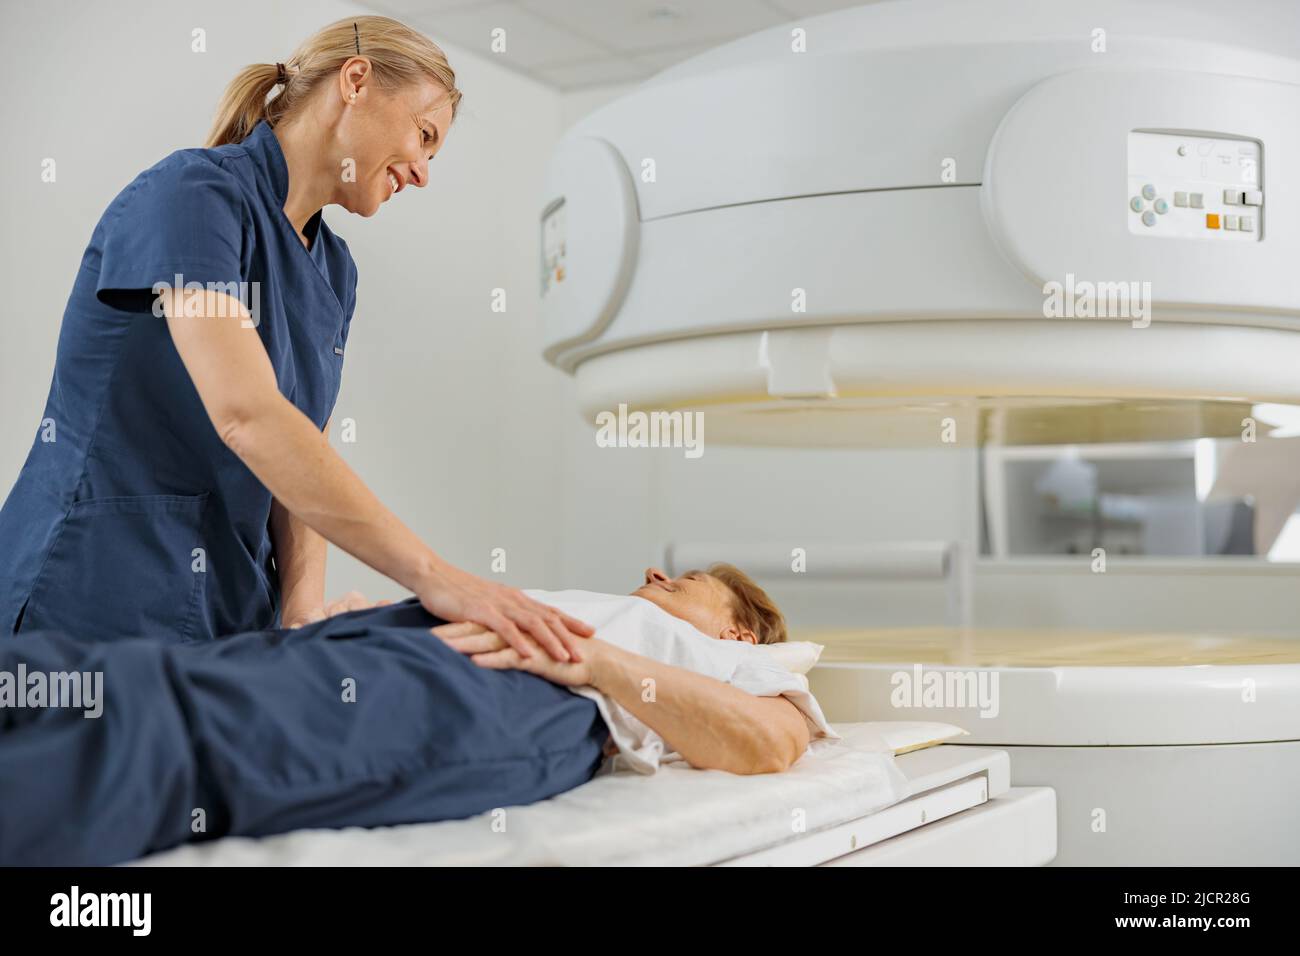 Radiologist controls MRI or CT or PET Scan with female patient undergoing procedure Stock Photo